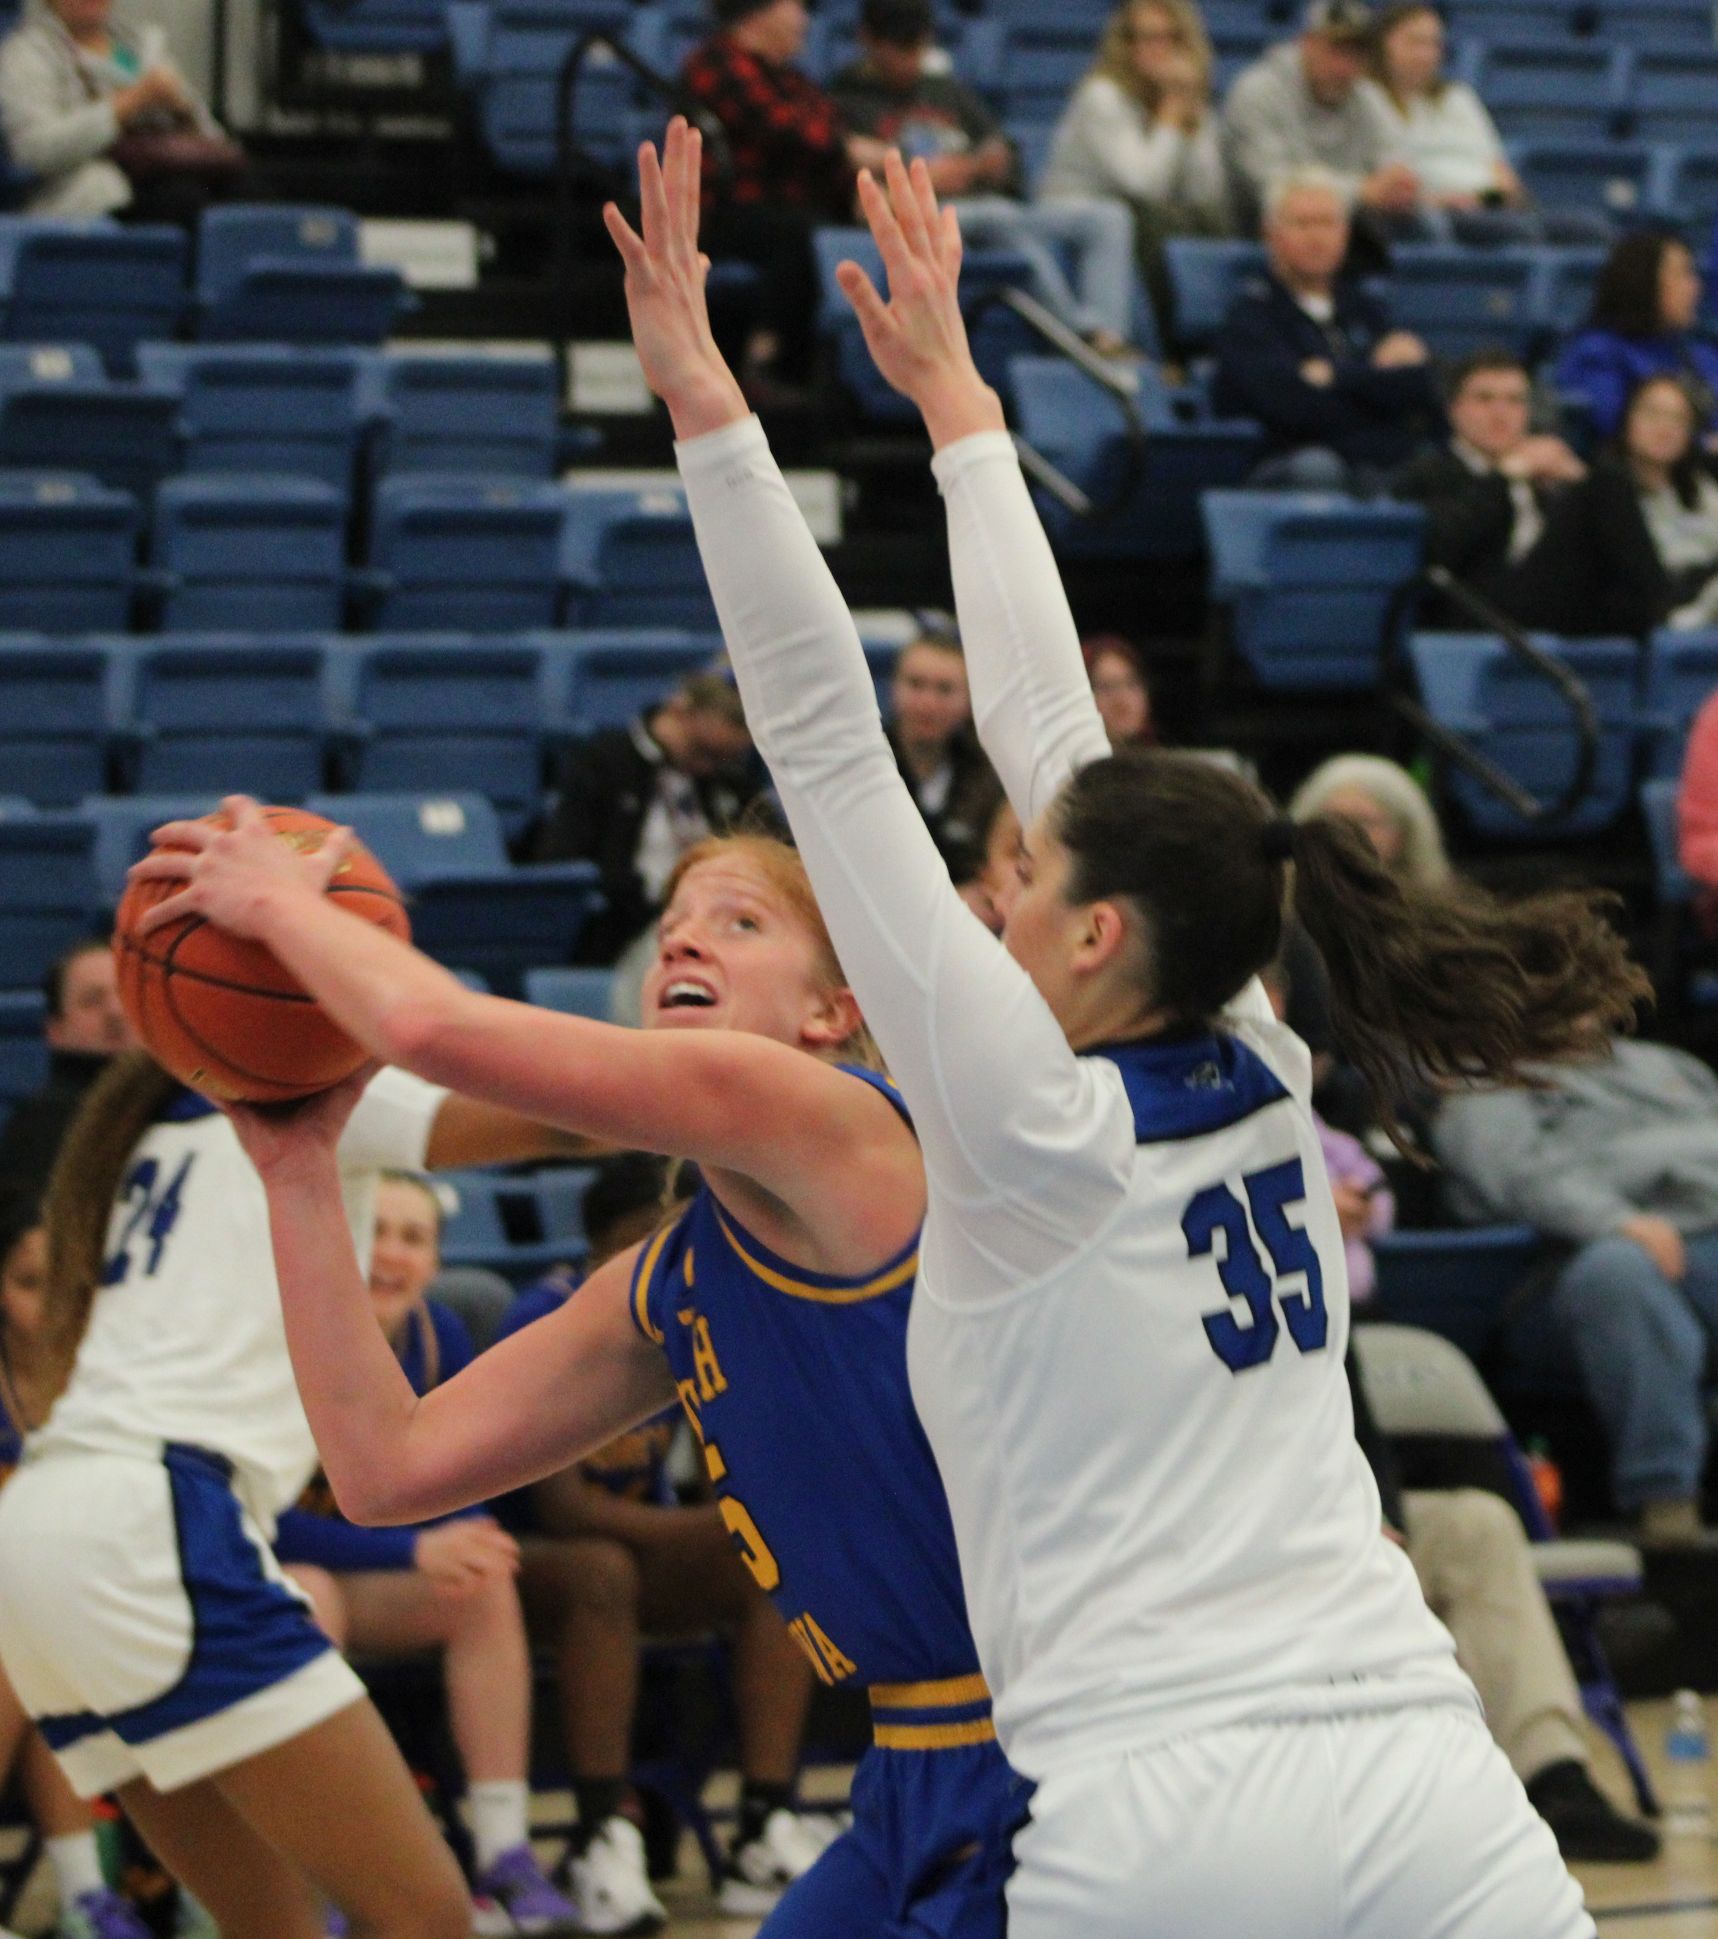 NIACC's Jackie Pippett was selected as the ICCAC player of the week for the week of Feb. 6-12.